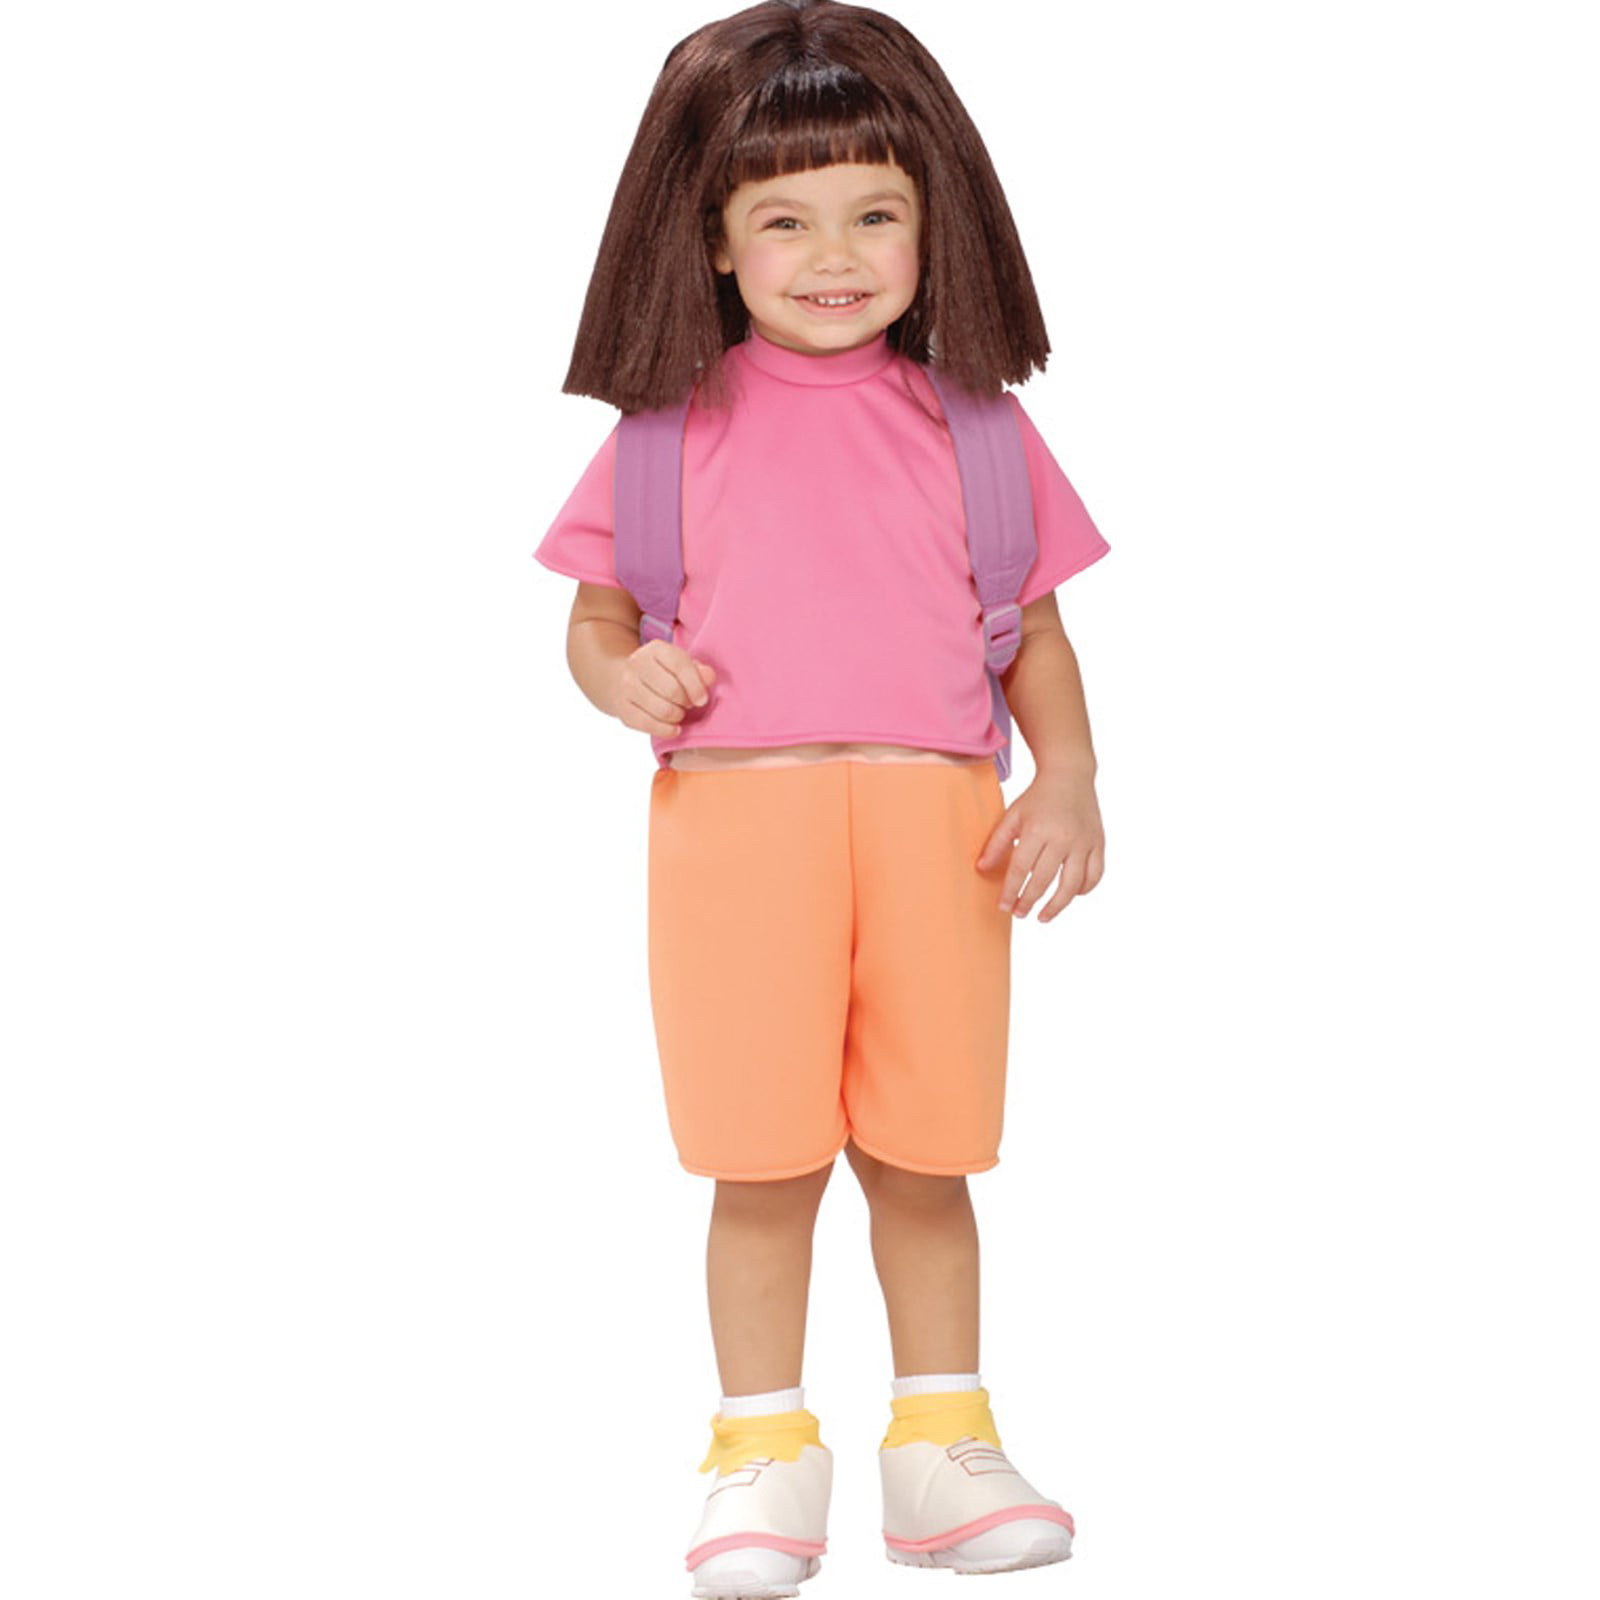 Dora and Friends Small Girls 5 Piece Costume New!!! 